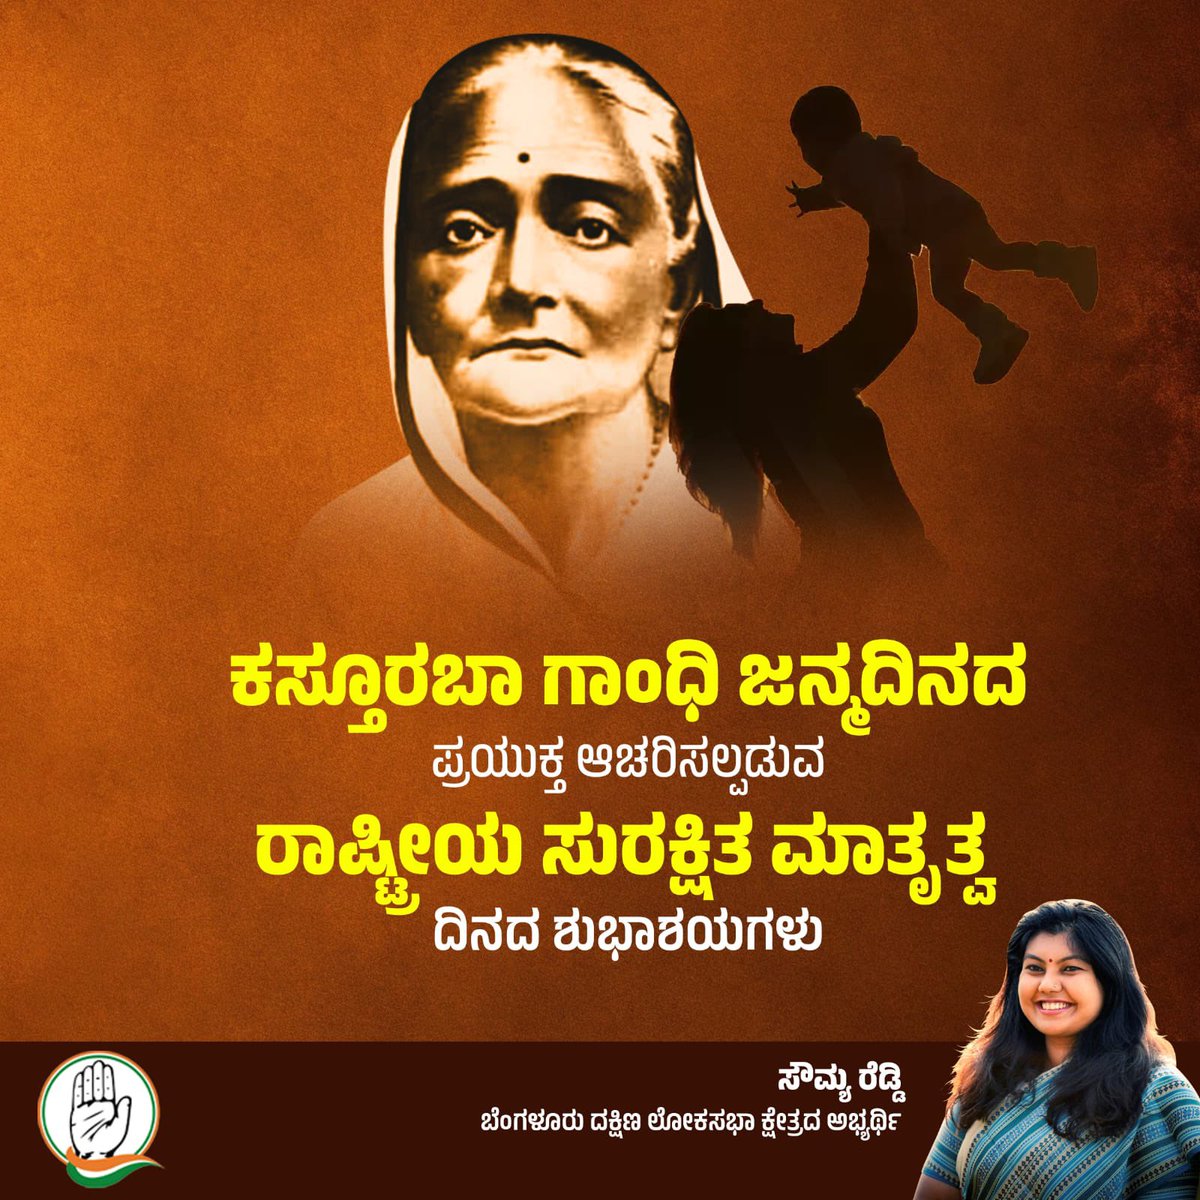 Honouring the legacy of Smt Kasturba Gandhi on her birth anniversary. A beacon of strength and resilience, her life inspires us to champion the causes of freedom and equality. #Freedom #Equality #Justice #SowmyaForSouth #SowmyaReddy